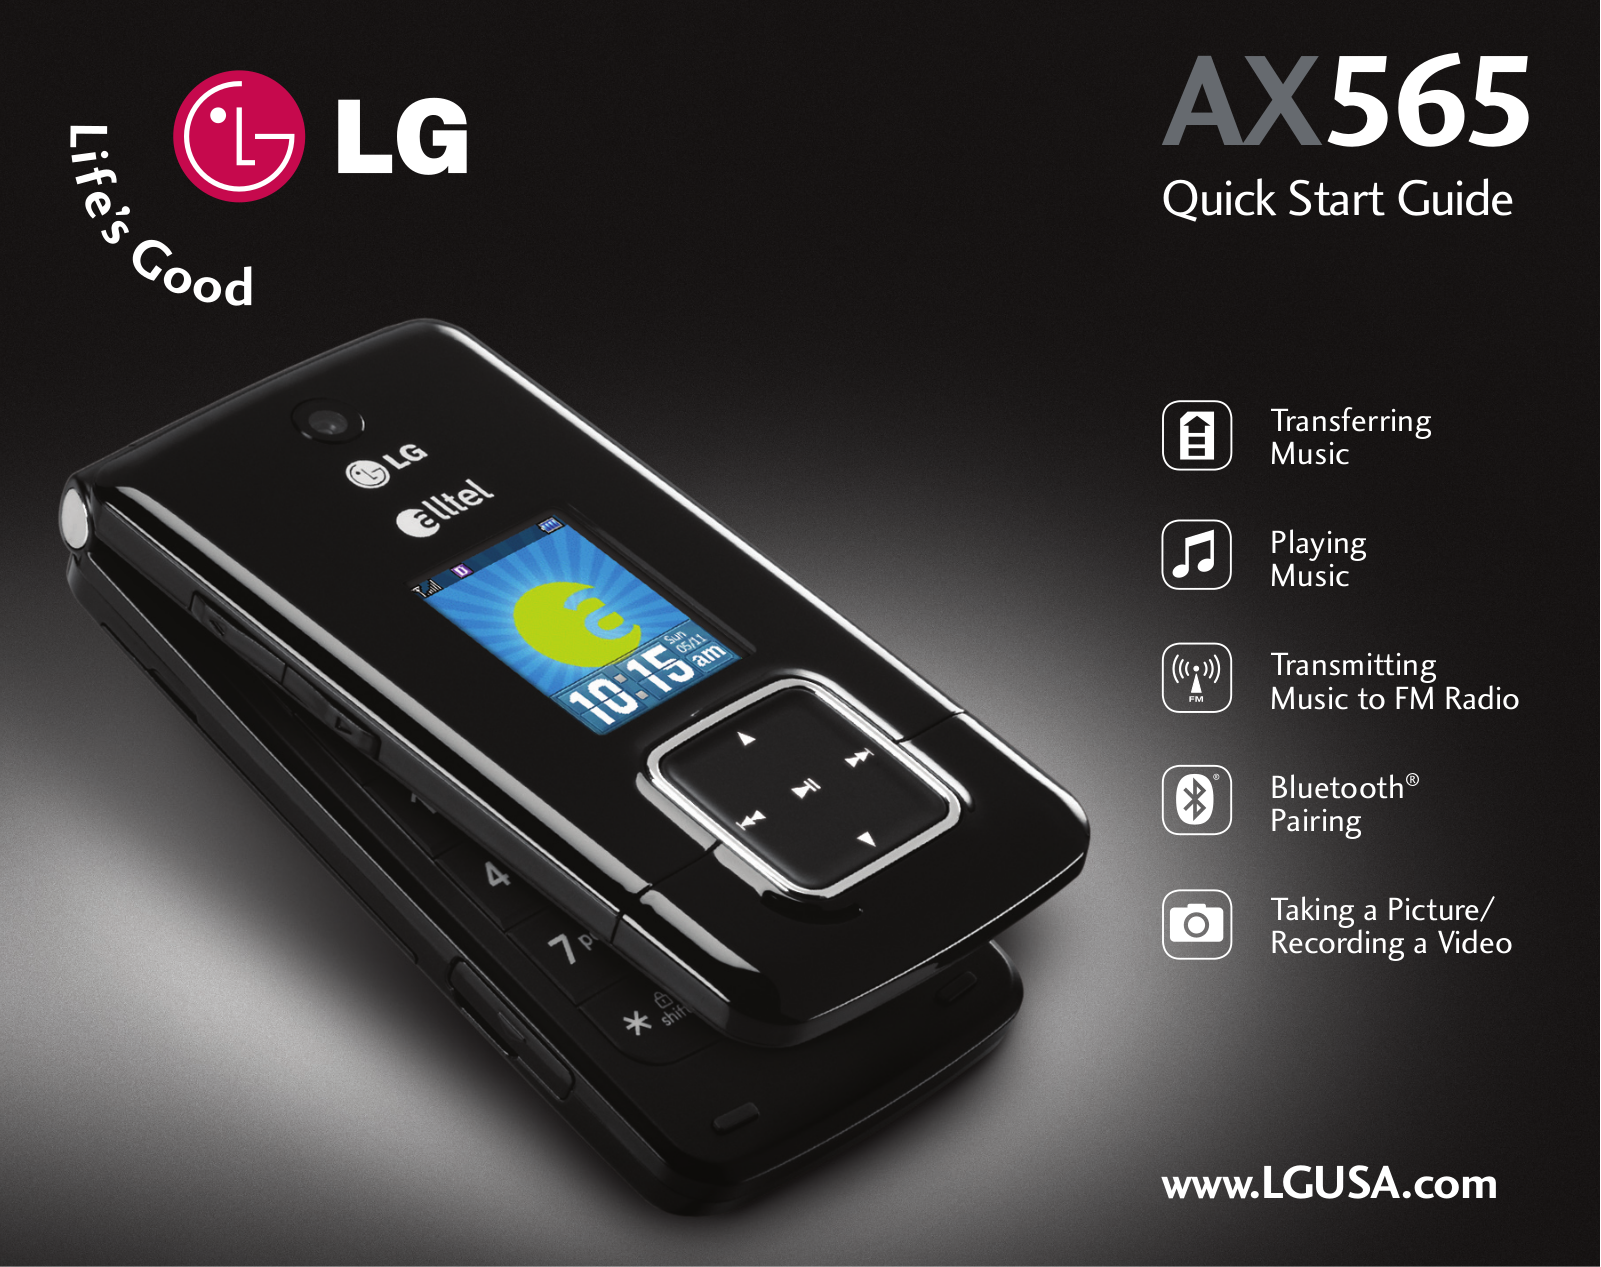 LG AX565 Quick Start Guide